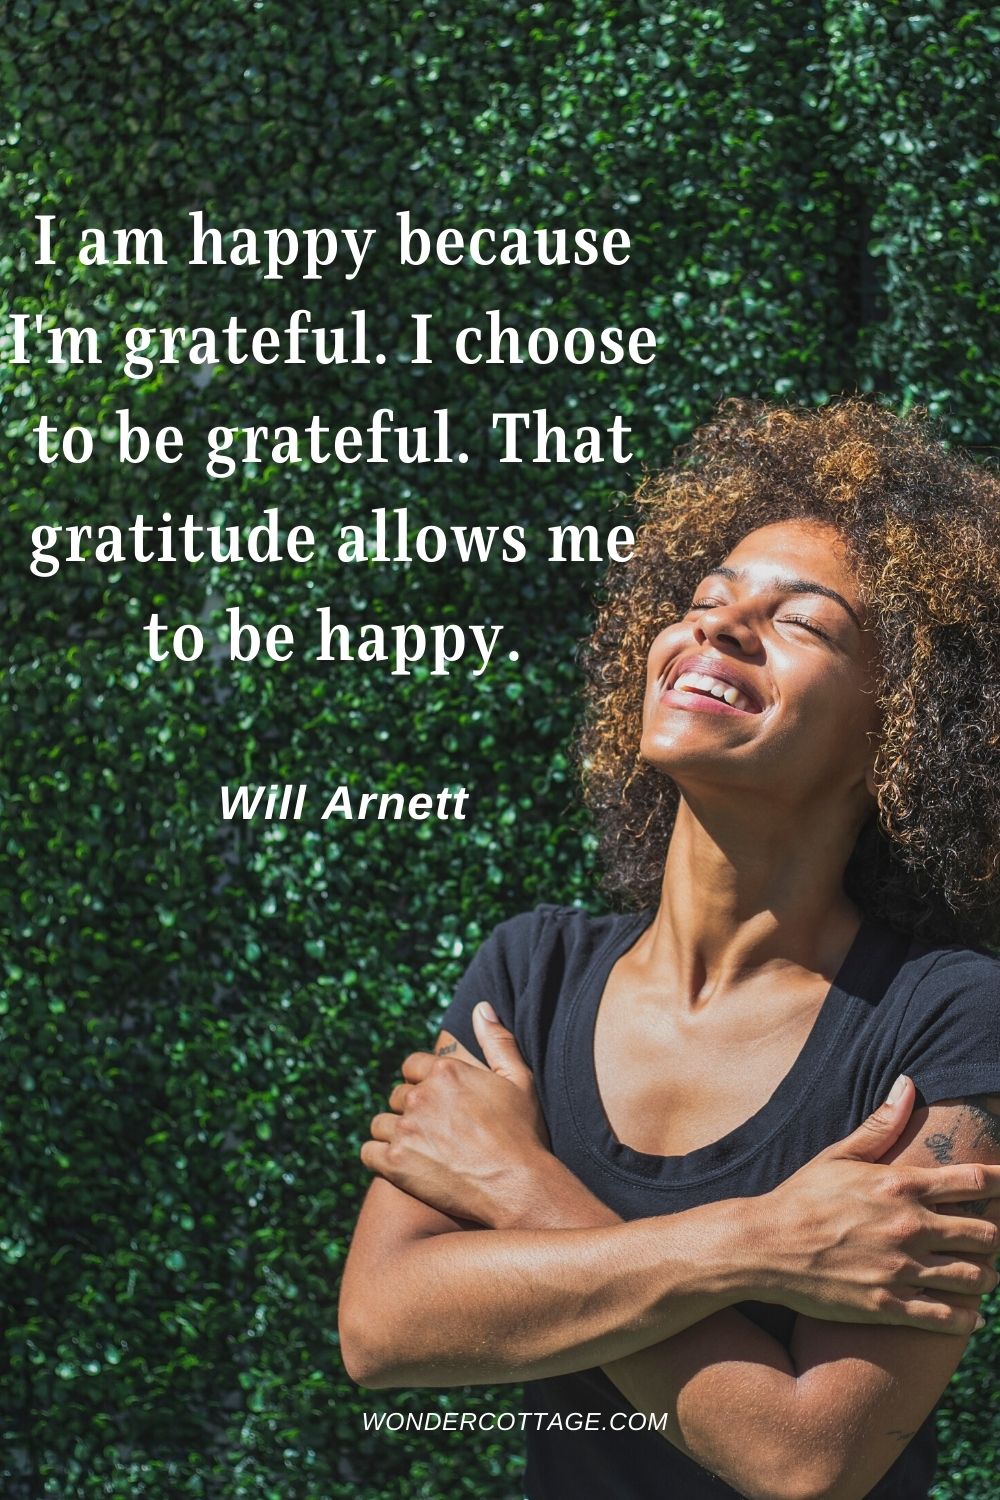 I am happy because I'm grateful. I choose to be grateful. That gratitude allows me to be happy. Will Arnett